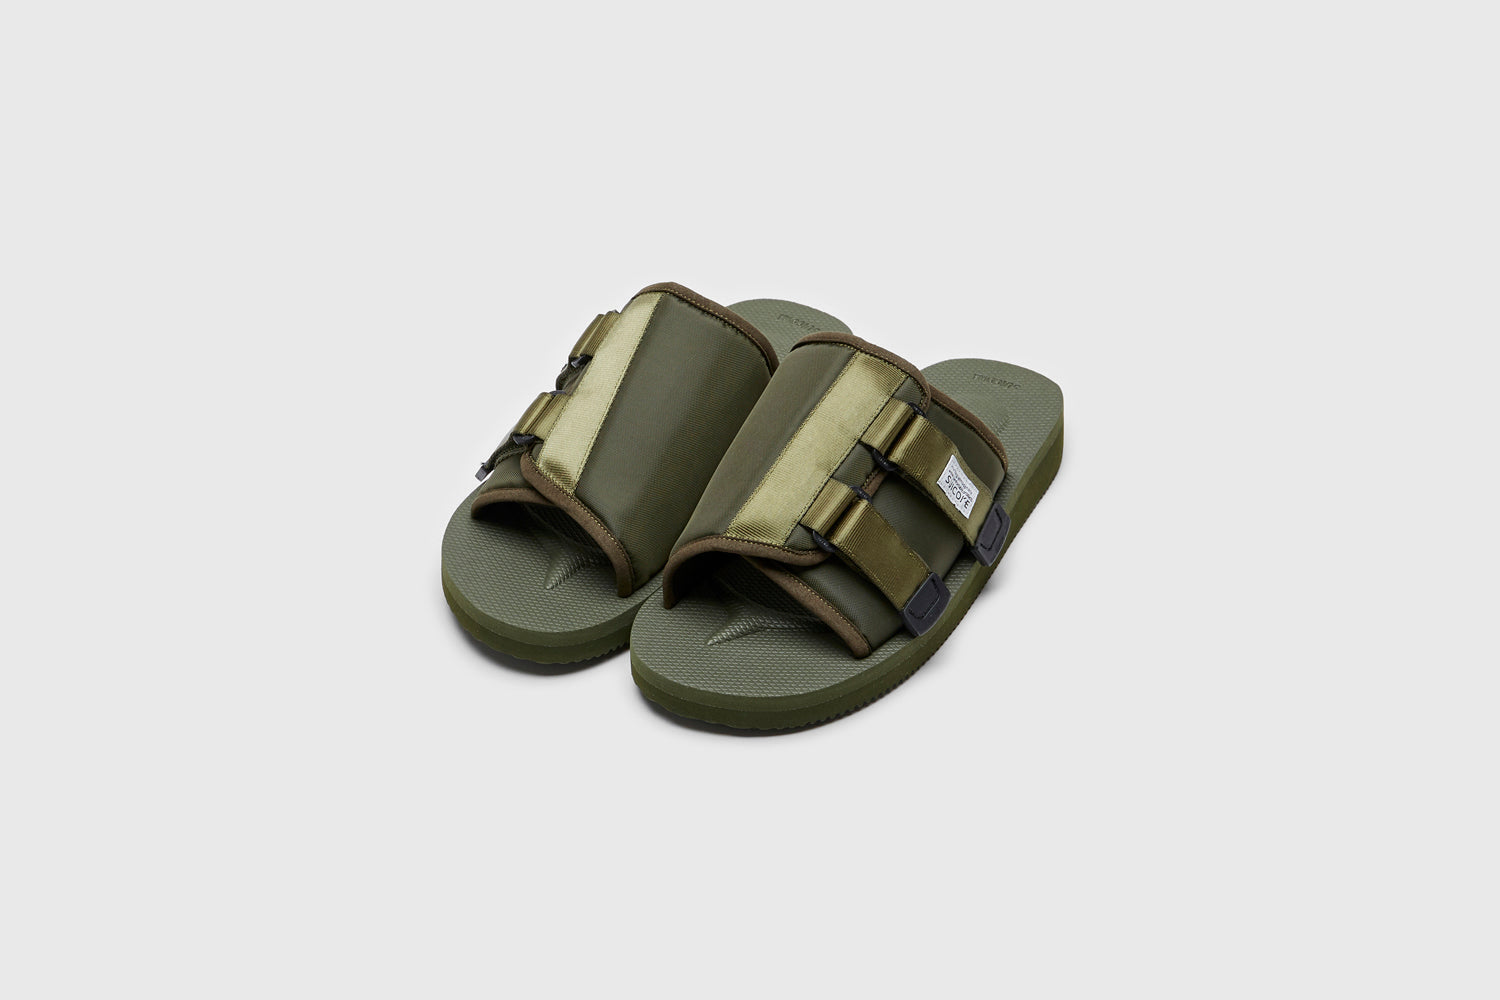 SUICOKE KAW-Cab sandals with olive nylon upper, olive midsole and sole, straps and logo patch. From Spring/Summer 2023 collection on eightywingold Web Store, an official partner of SUICOKE. OG-081CAB OLIVE